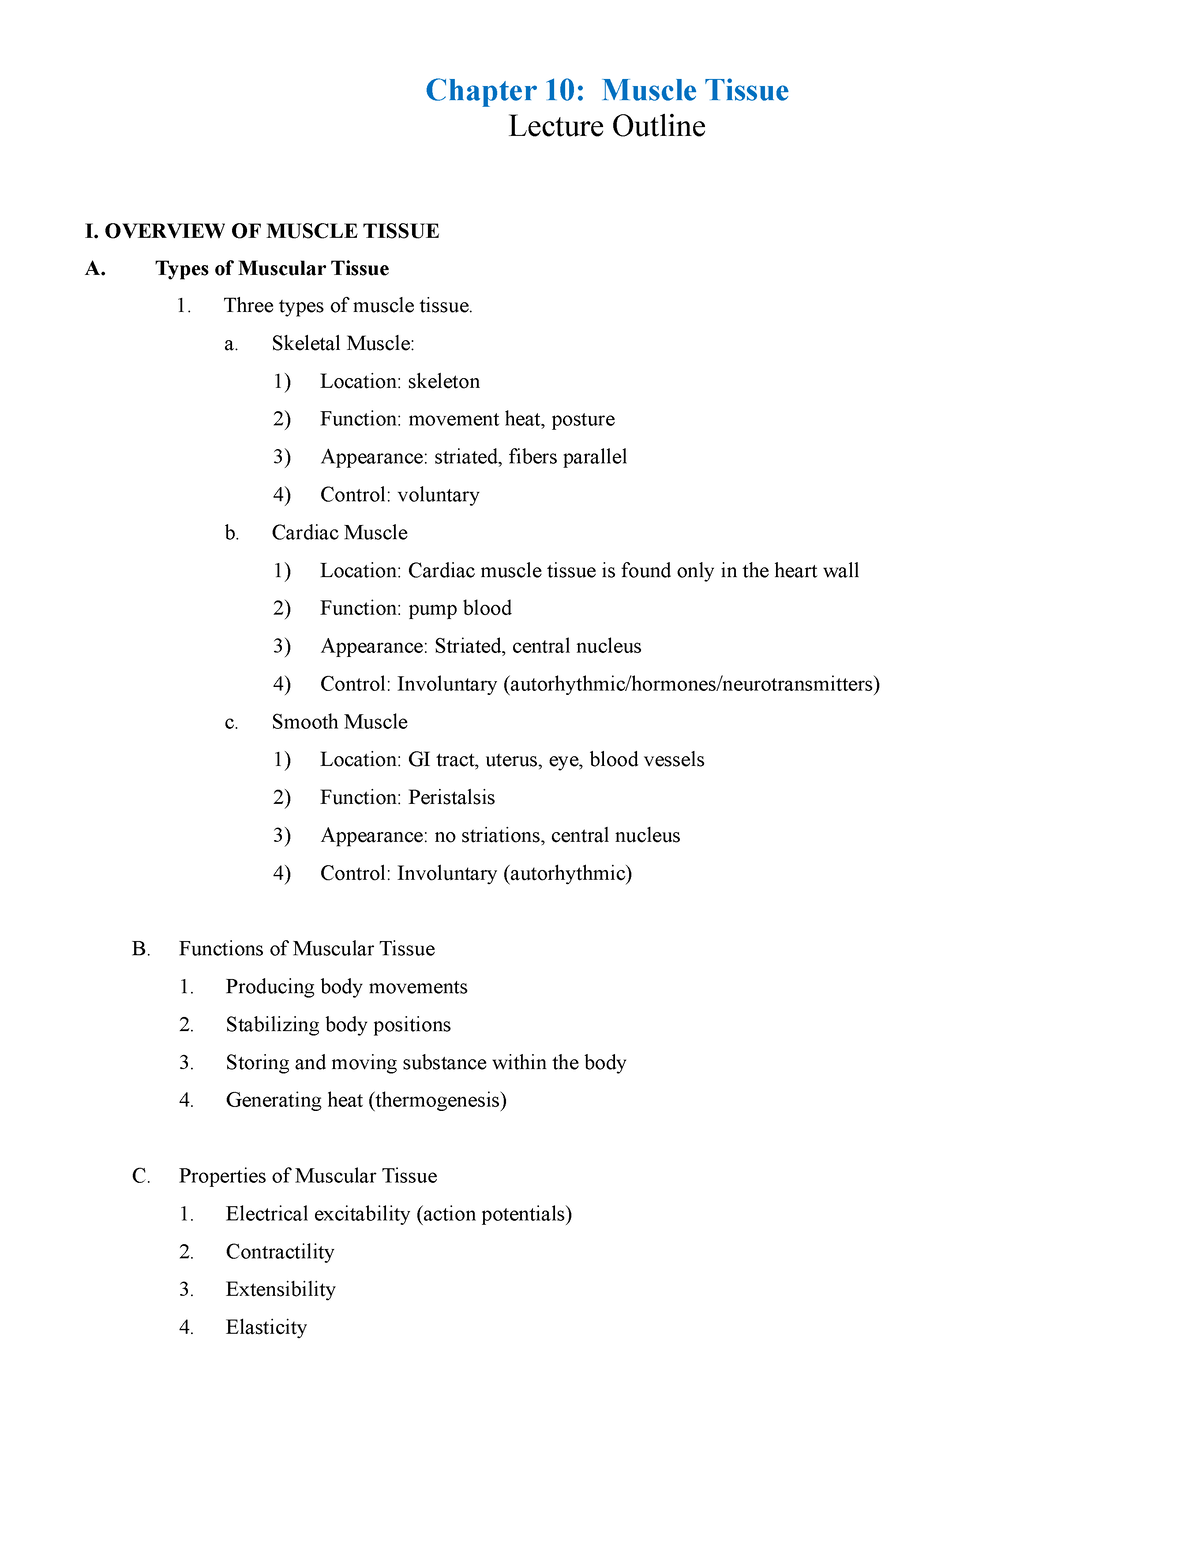 Chp 10 Muscular Tissue lecture outline - Chapter 10: Muscle Tissue ...